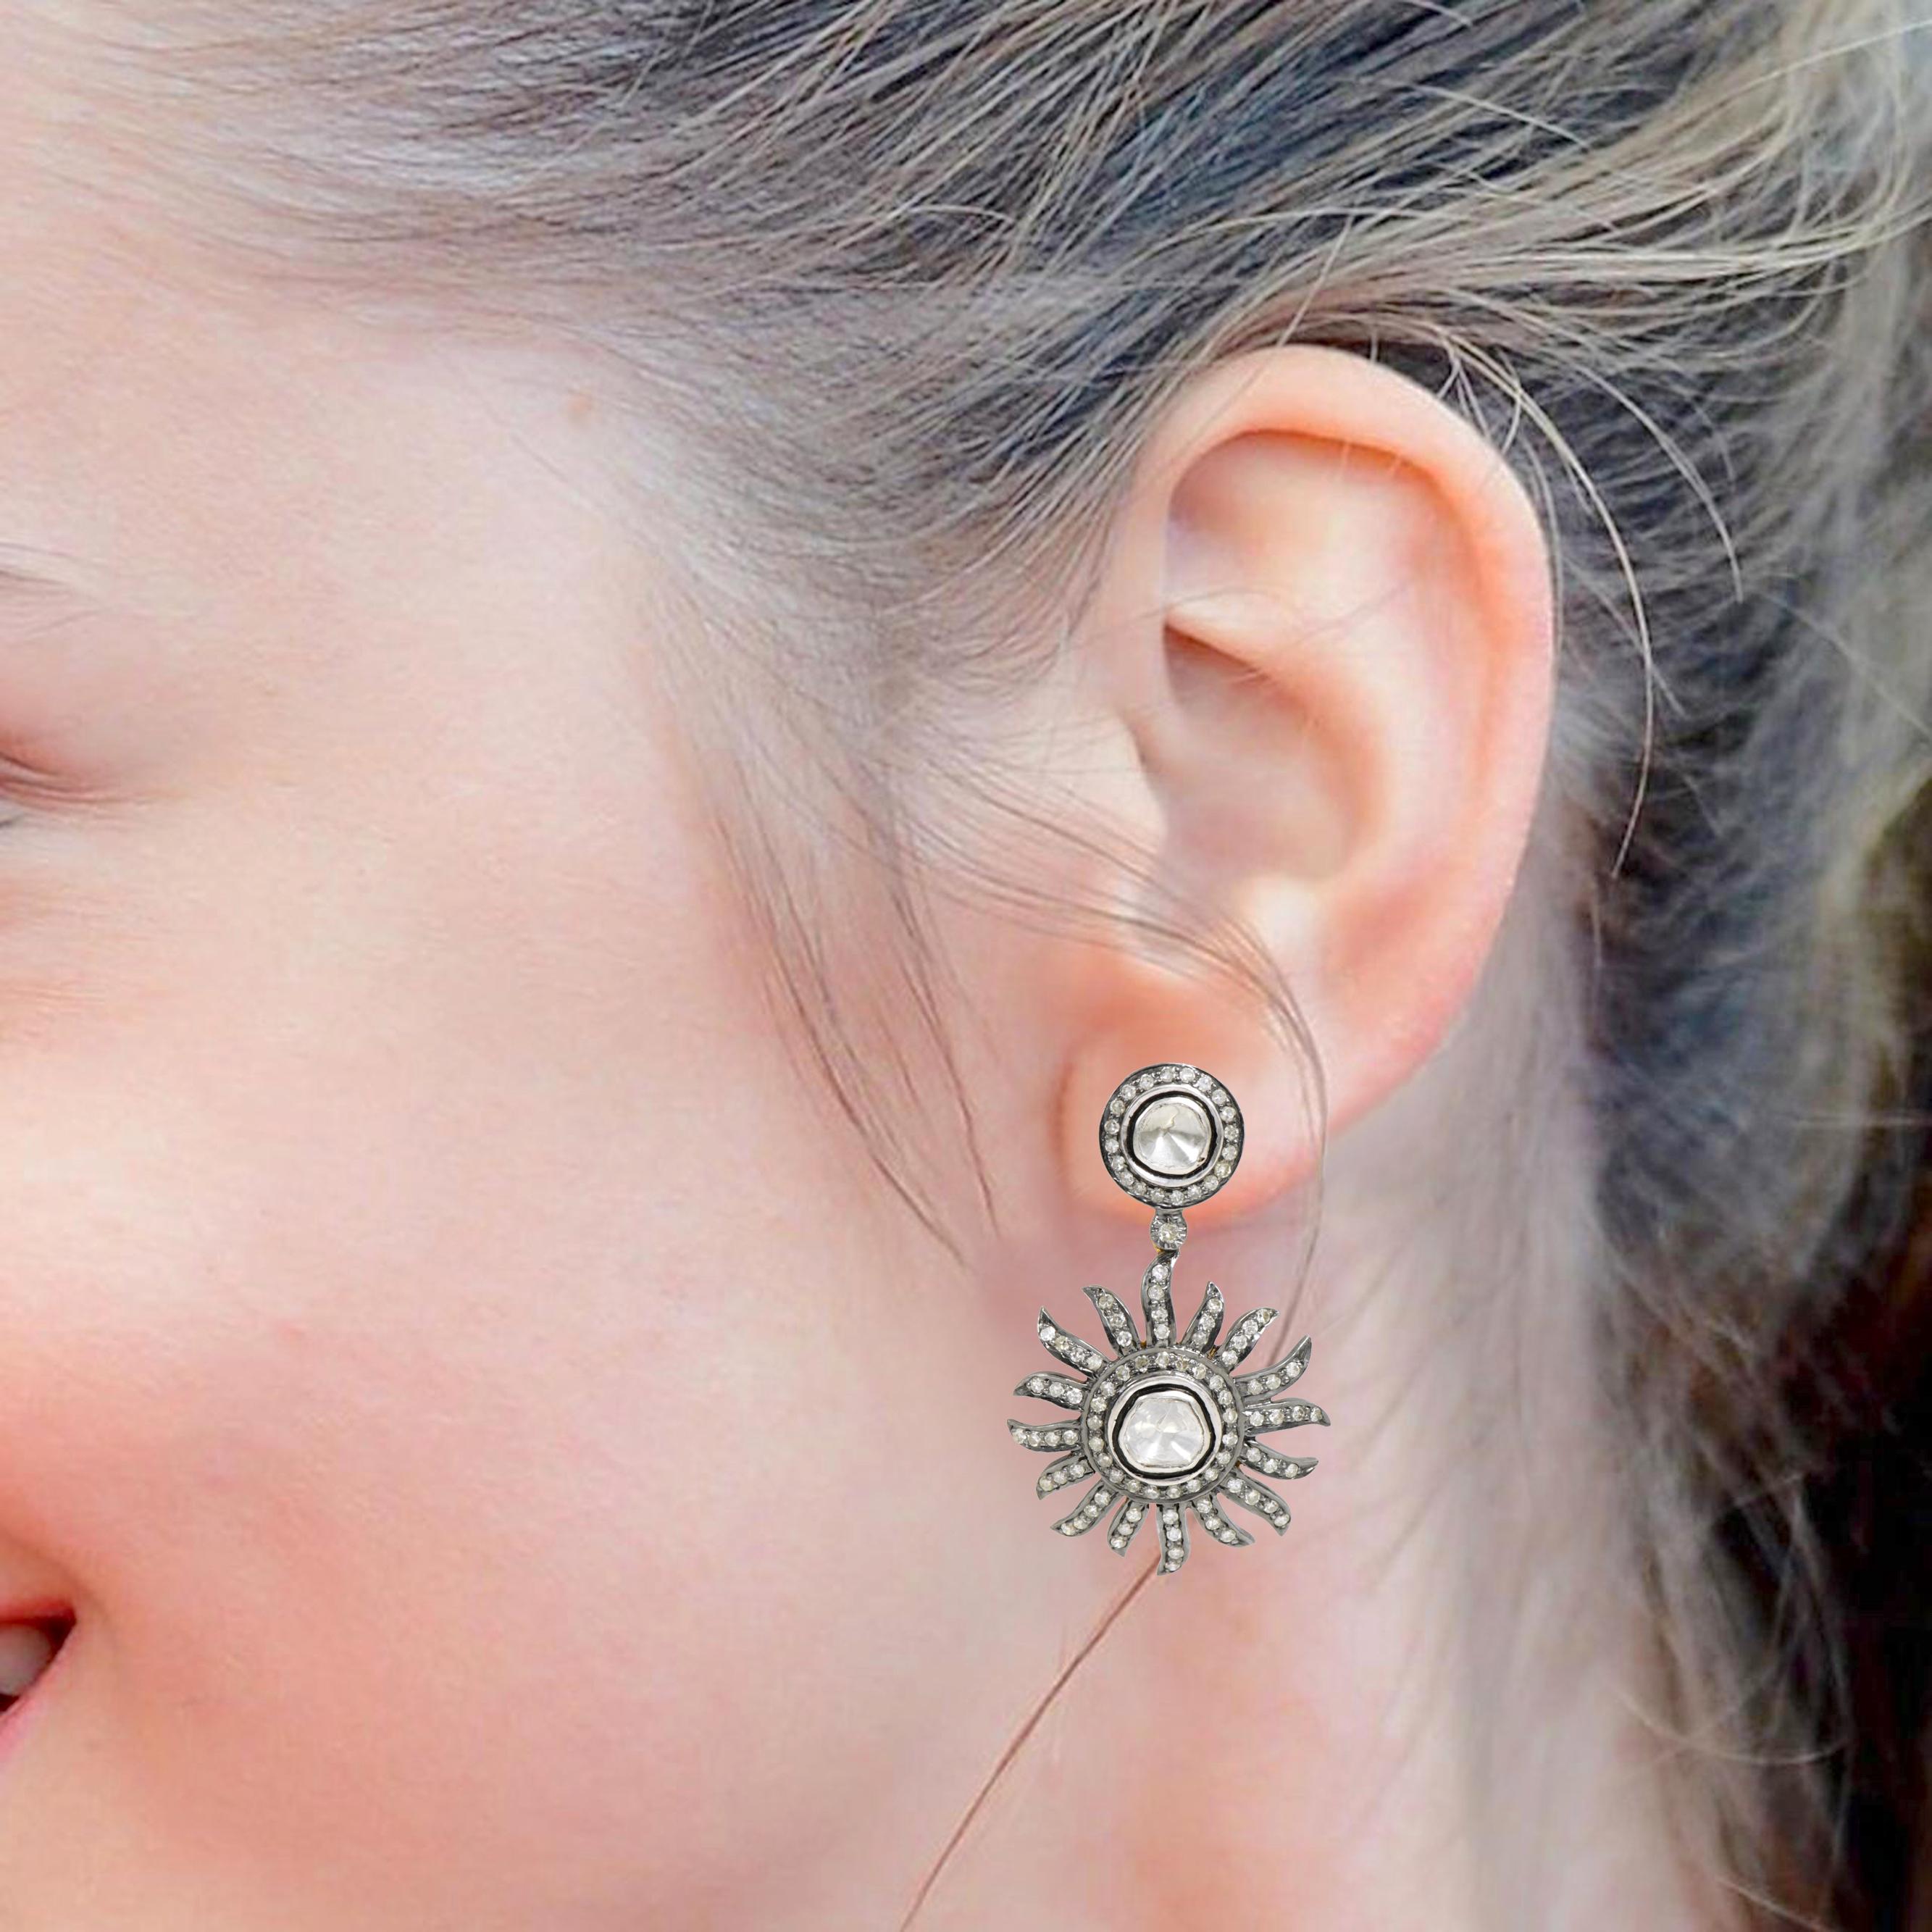 2.28 Carat Diamond Sunburst Dangle Earrings in Art-Deco Style 

Set in the Victorian period art-deco style, this classic pair is magnificent. Featuring uncut Polki diamonds, this extraordinary silhouette is designed in the form of a sunflower. The